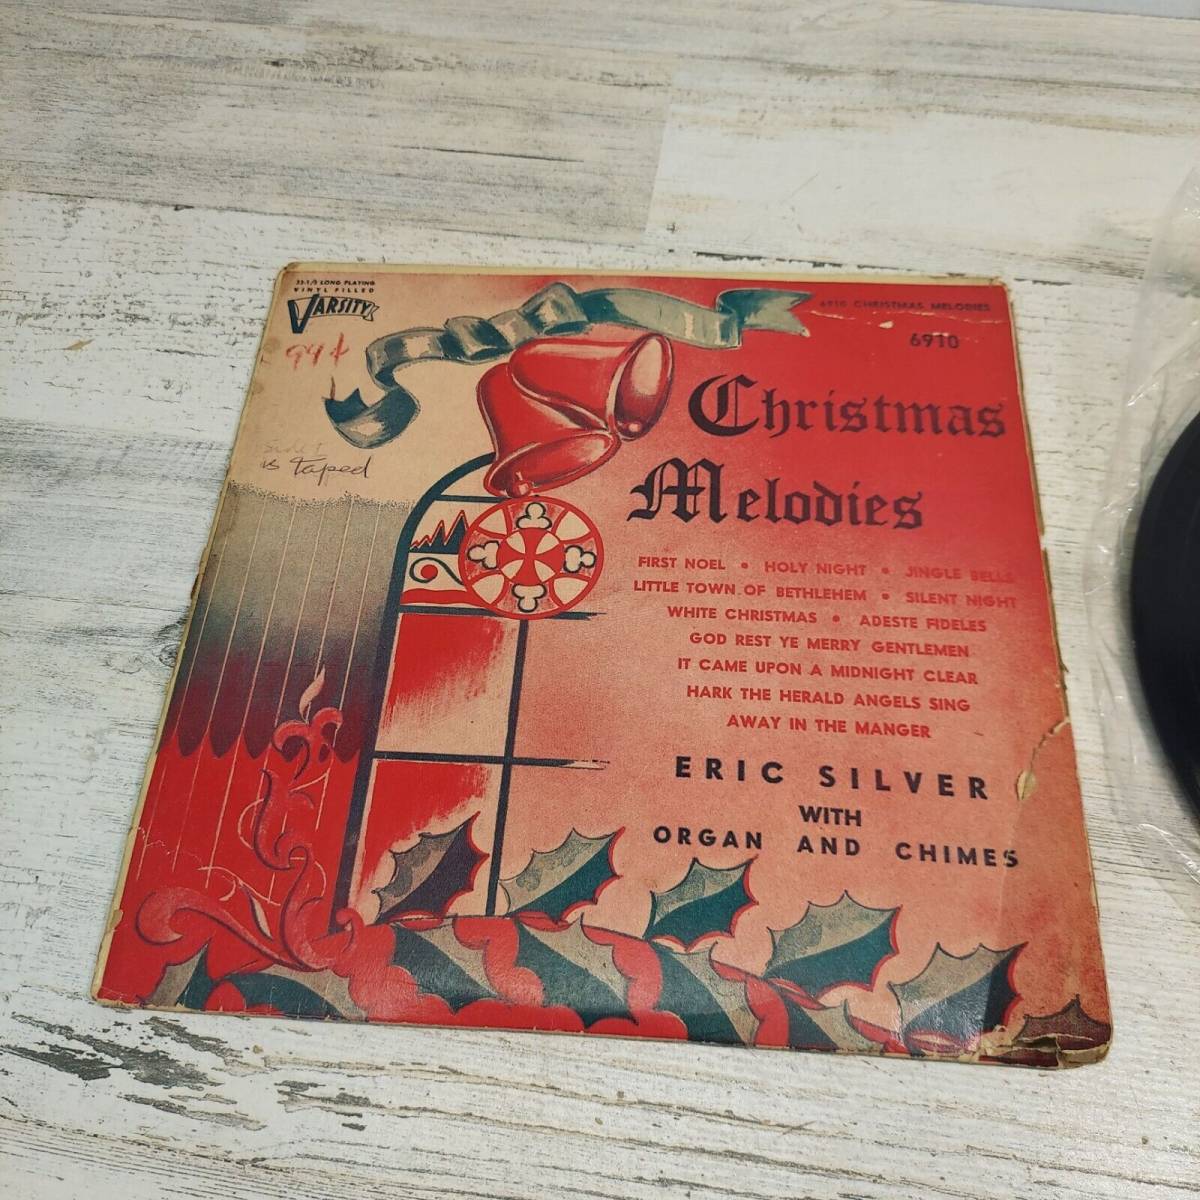 Varsity Christmas Melodies 33 1/3 Long Playing Record Album Eric Silver 海外 即決